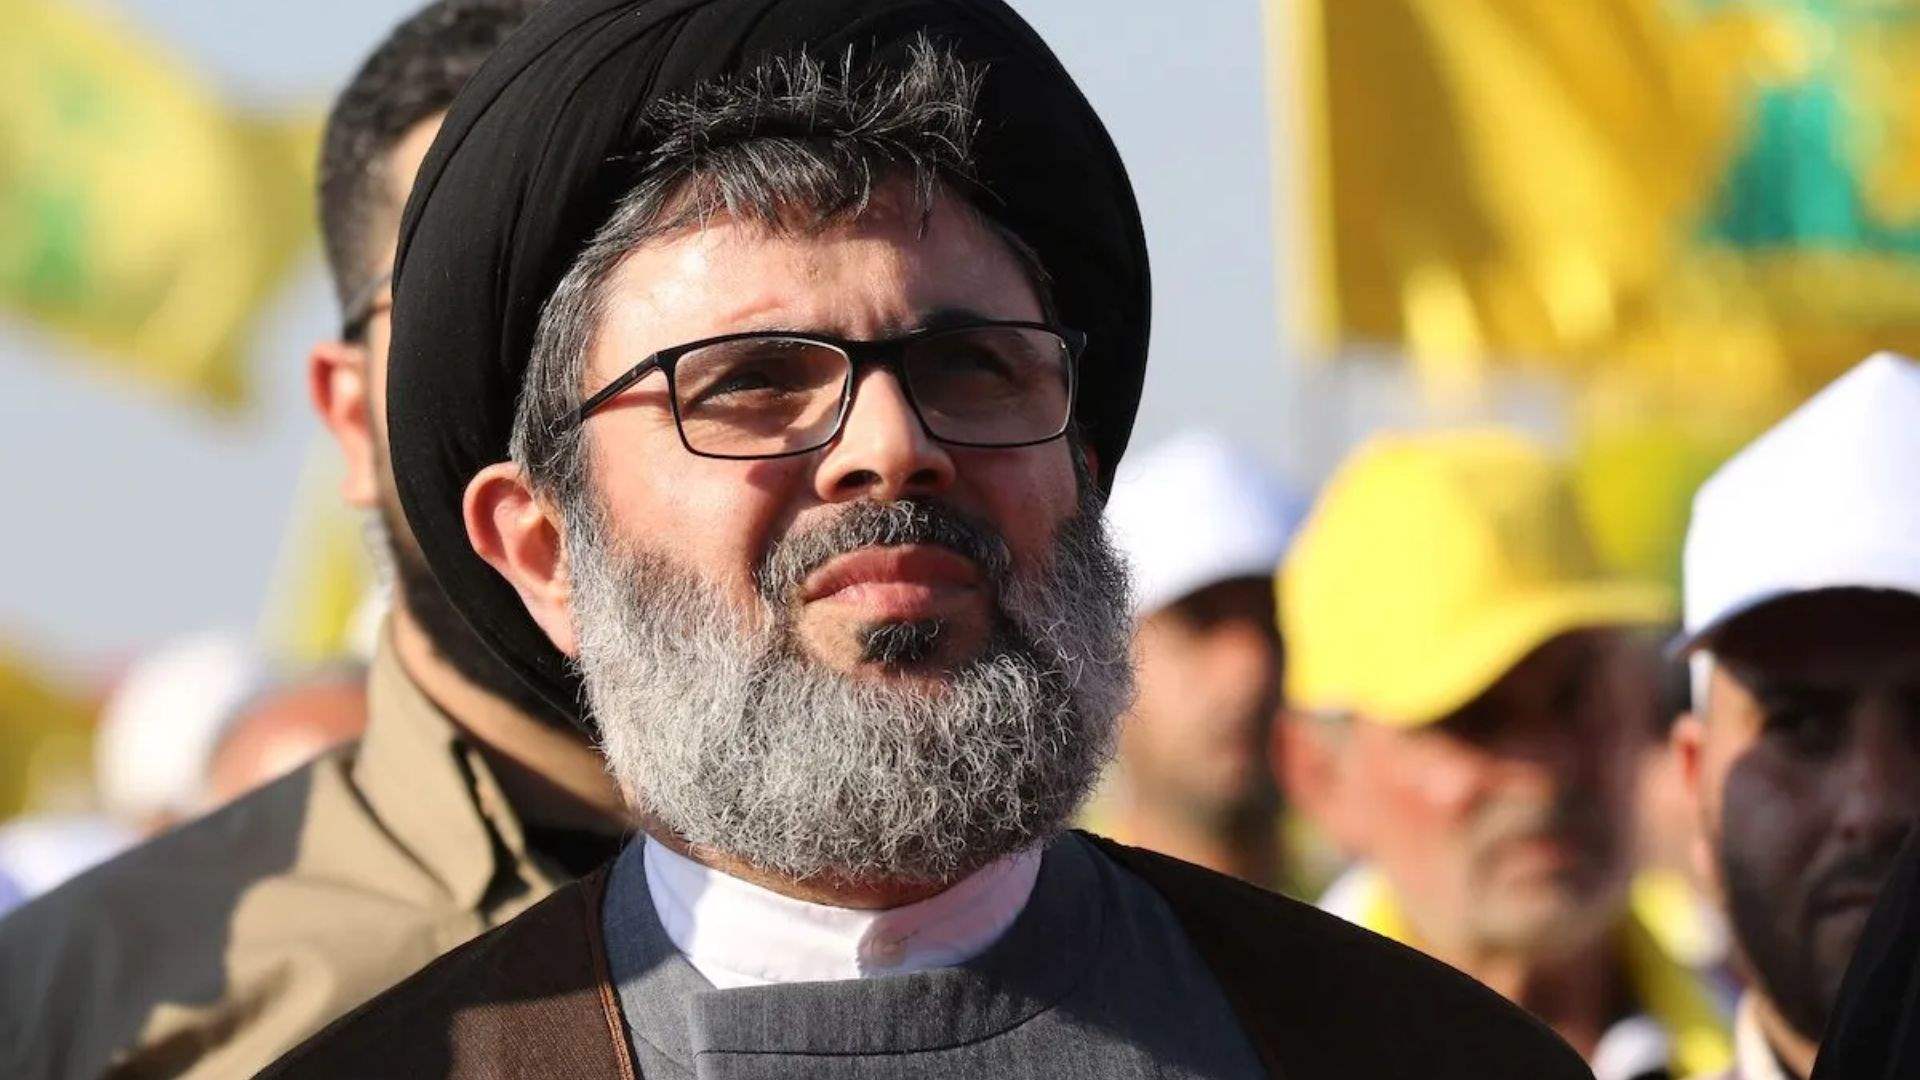 Hezbollah calls for dialogue to save Lebanon, denies discussing Taif Agreement amendment   